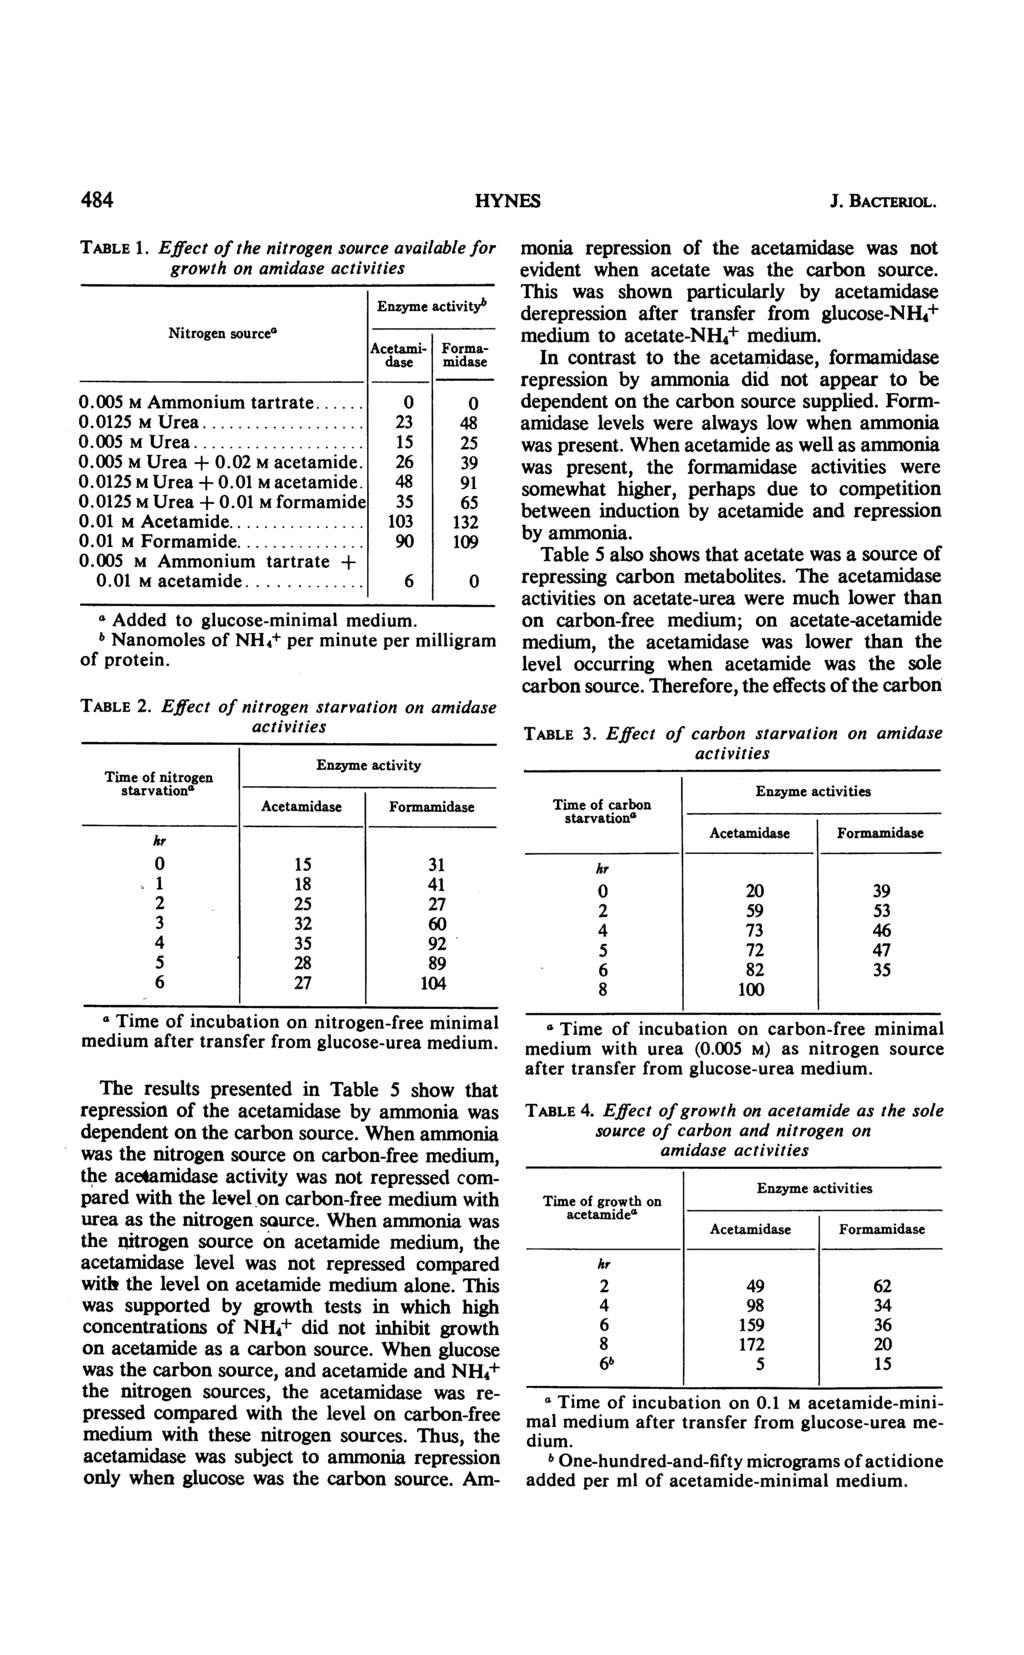 484 HYNERS J. BACTERiuOL. TABLE 1. Effect of the nitrogen source available for growth on amidase Nitrogen source" Enzyme activity, Forma- midase 0.005 M Ammonium tartrate 0 0 0.0125MUrea... 23 48 0.